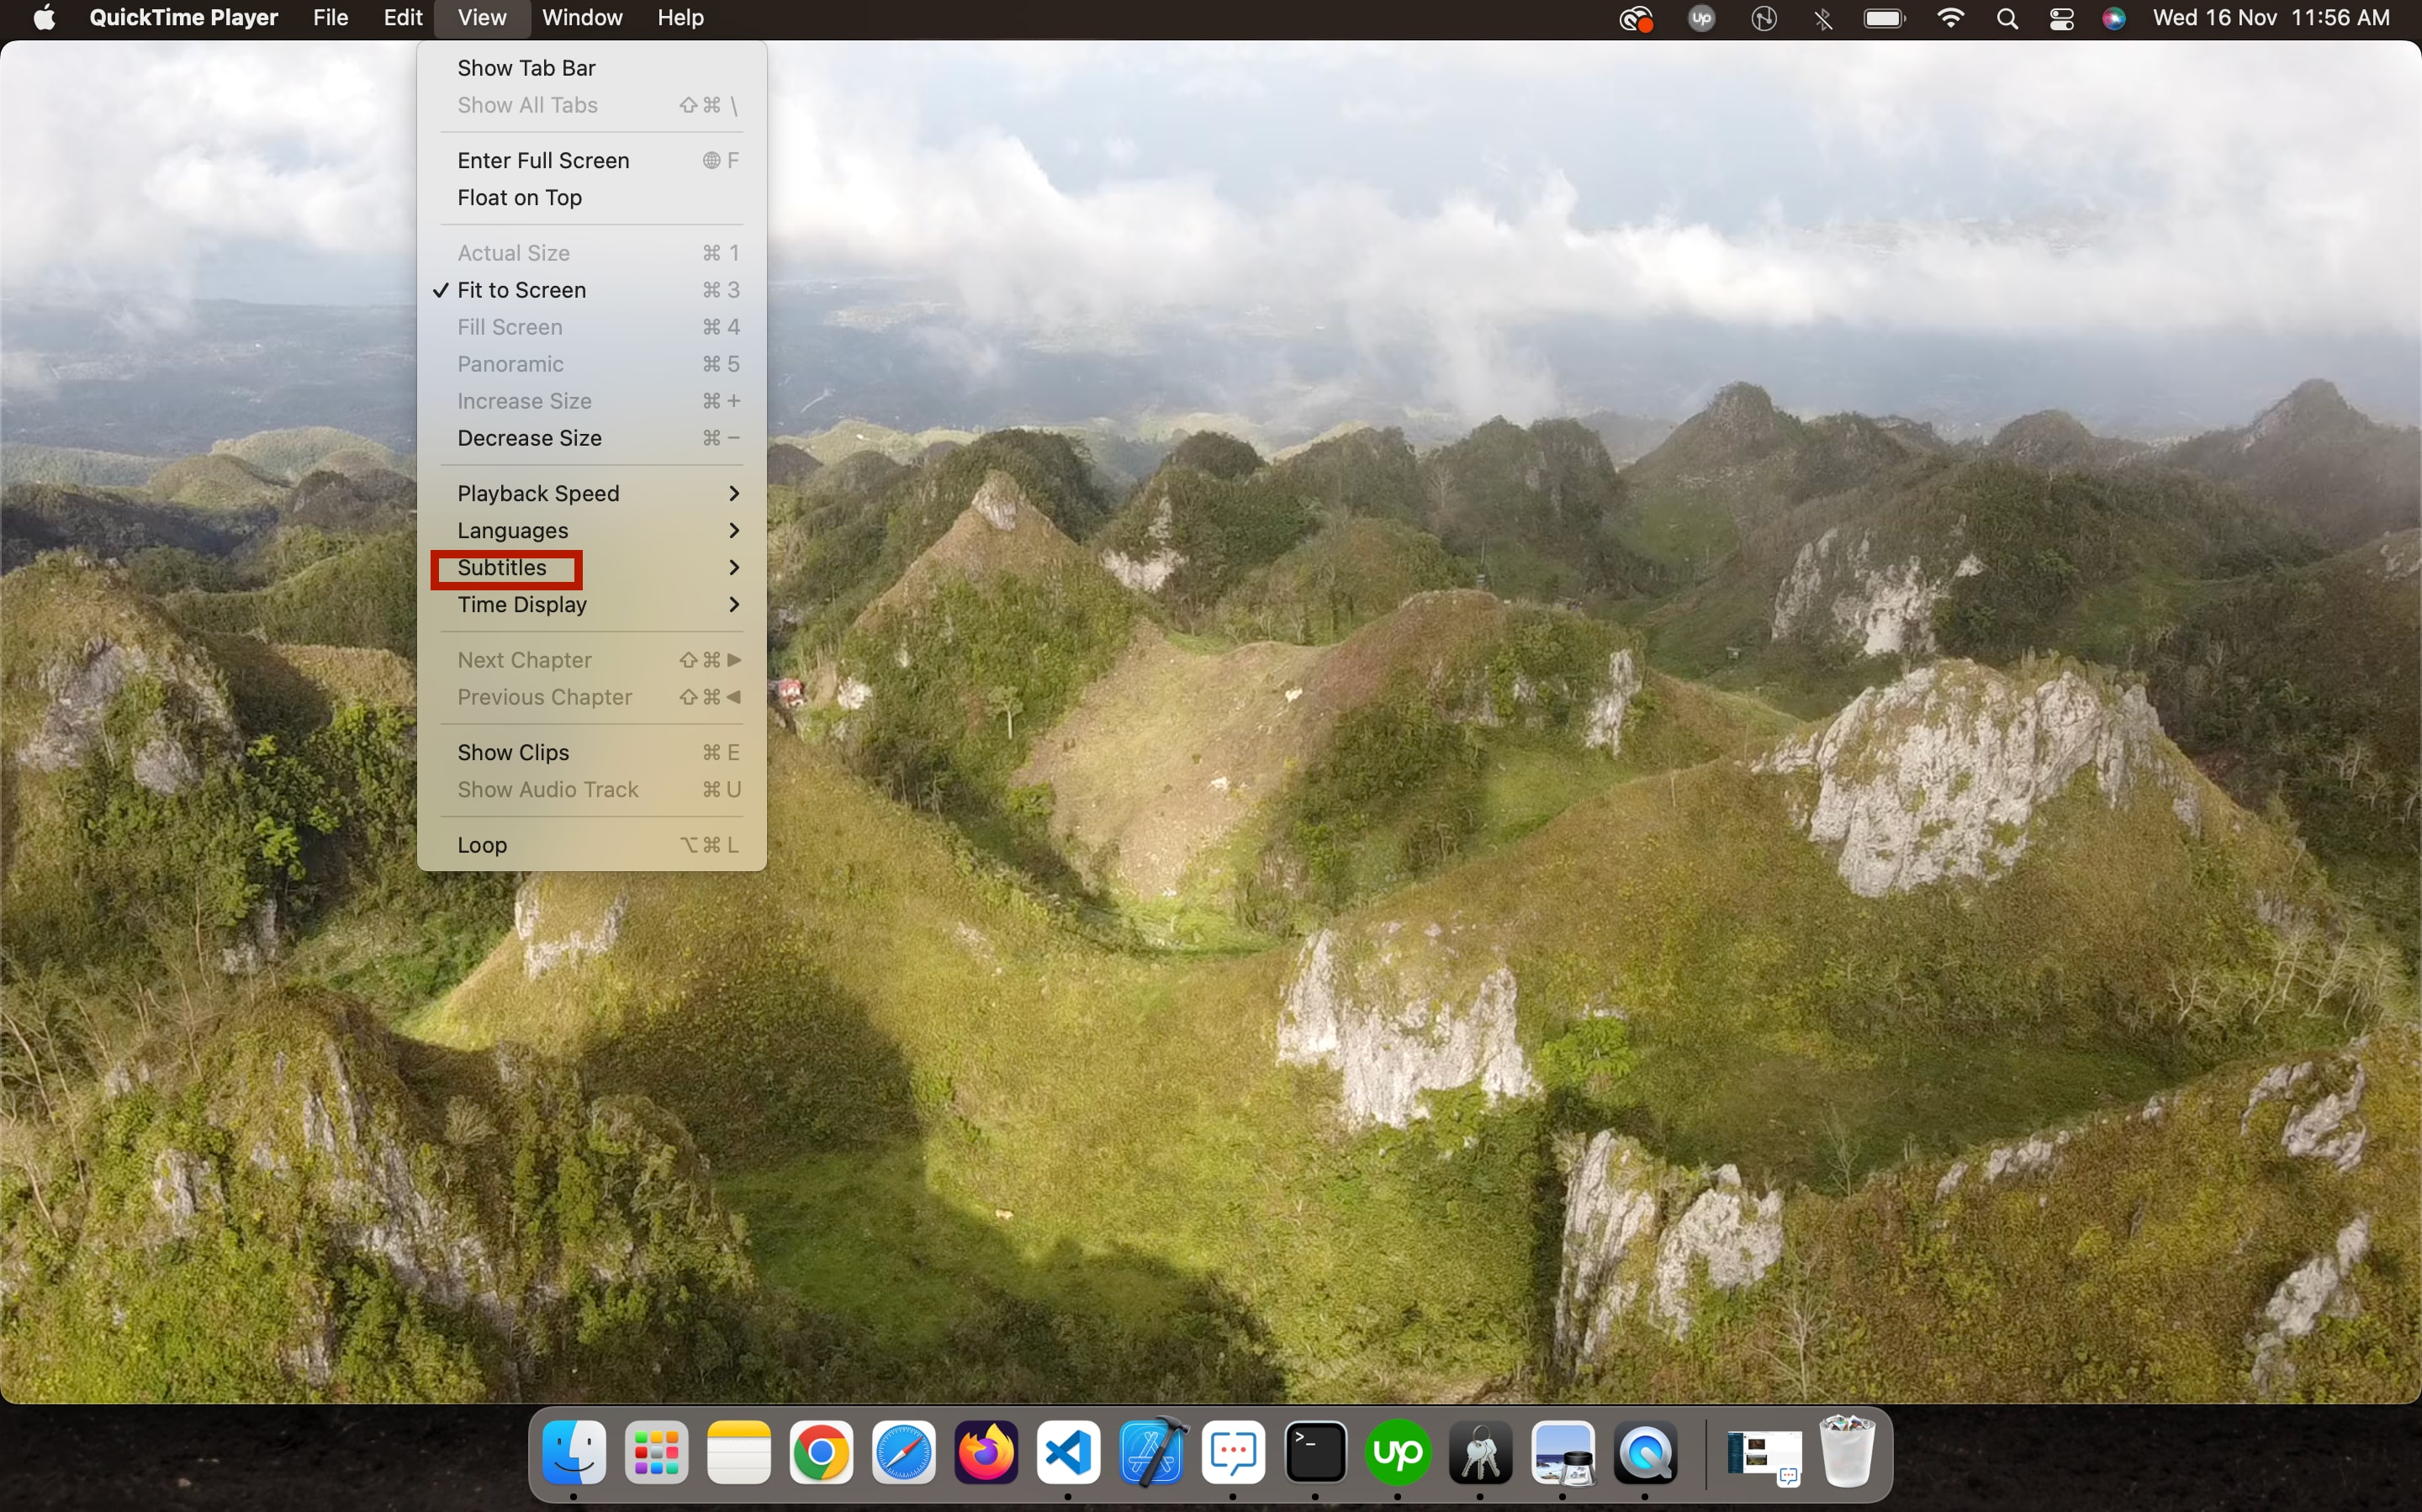 find and access subtitles option in quicktime